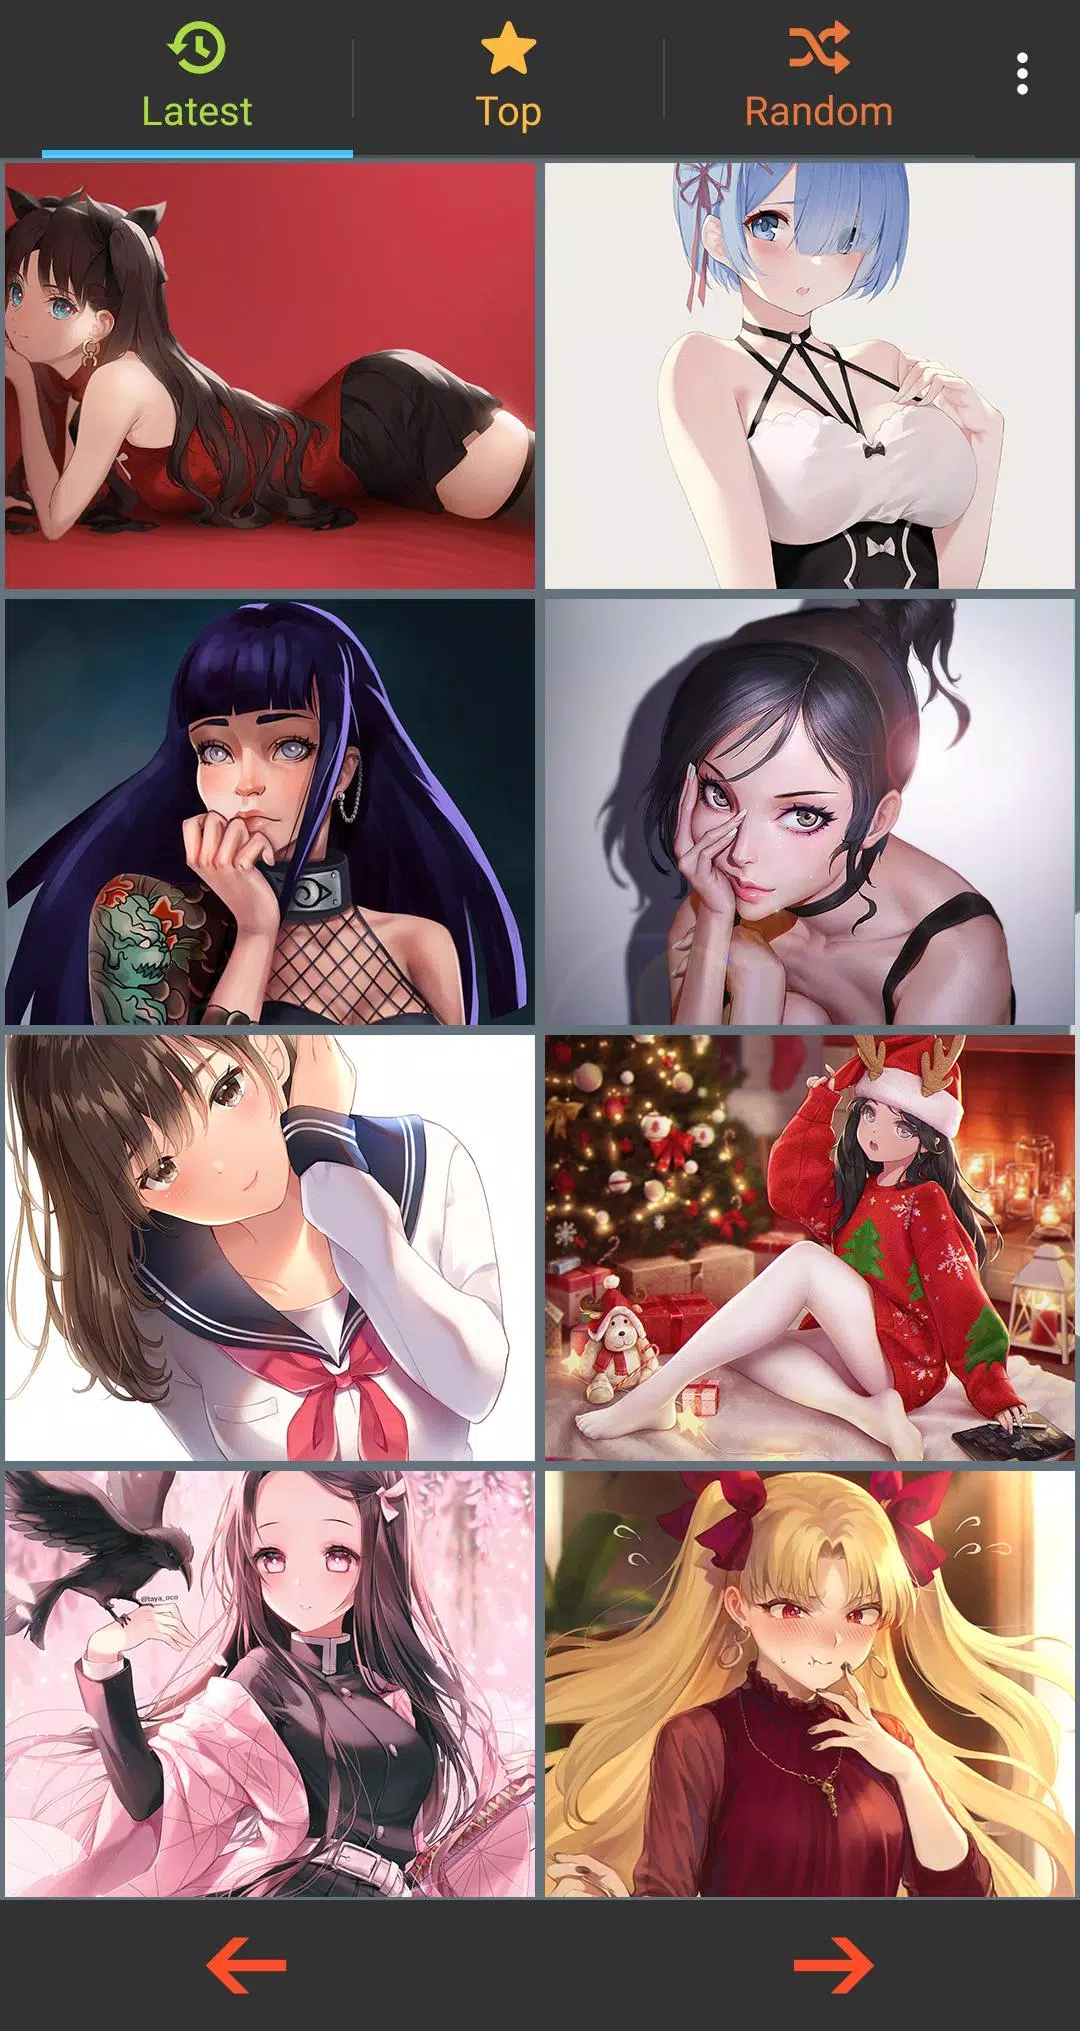 Download do APK de Sexy Anime Girl Wallpapers HD-(Hottest Manga Pics) para  Android